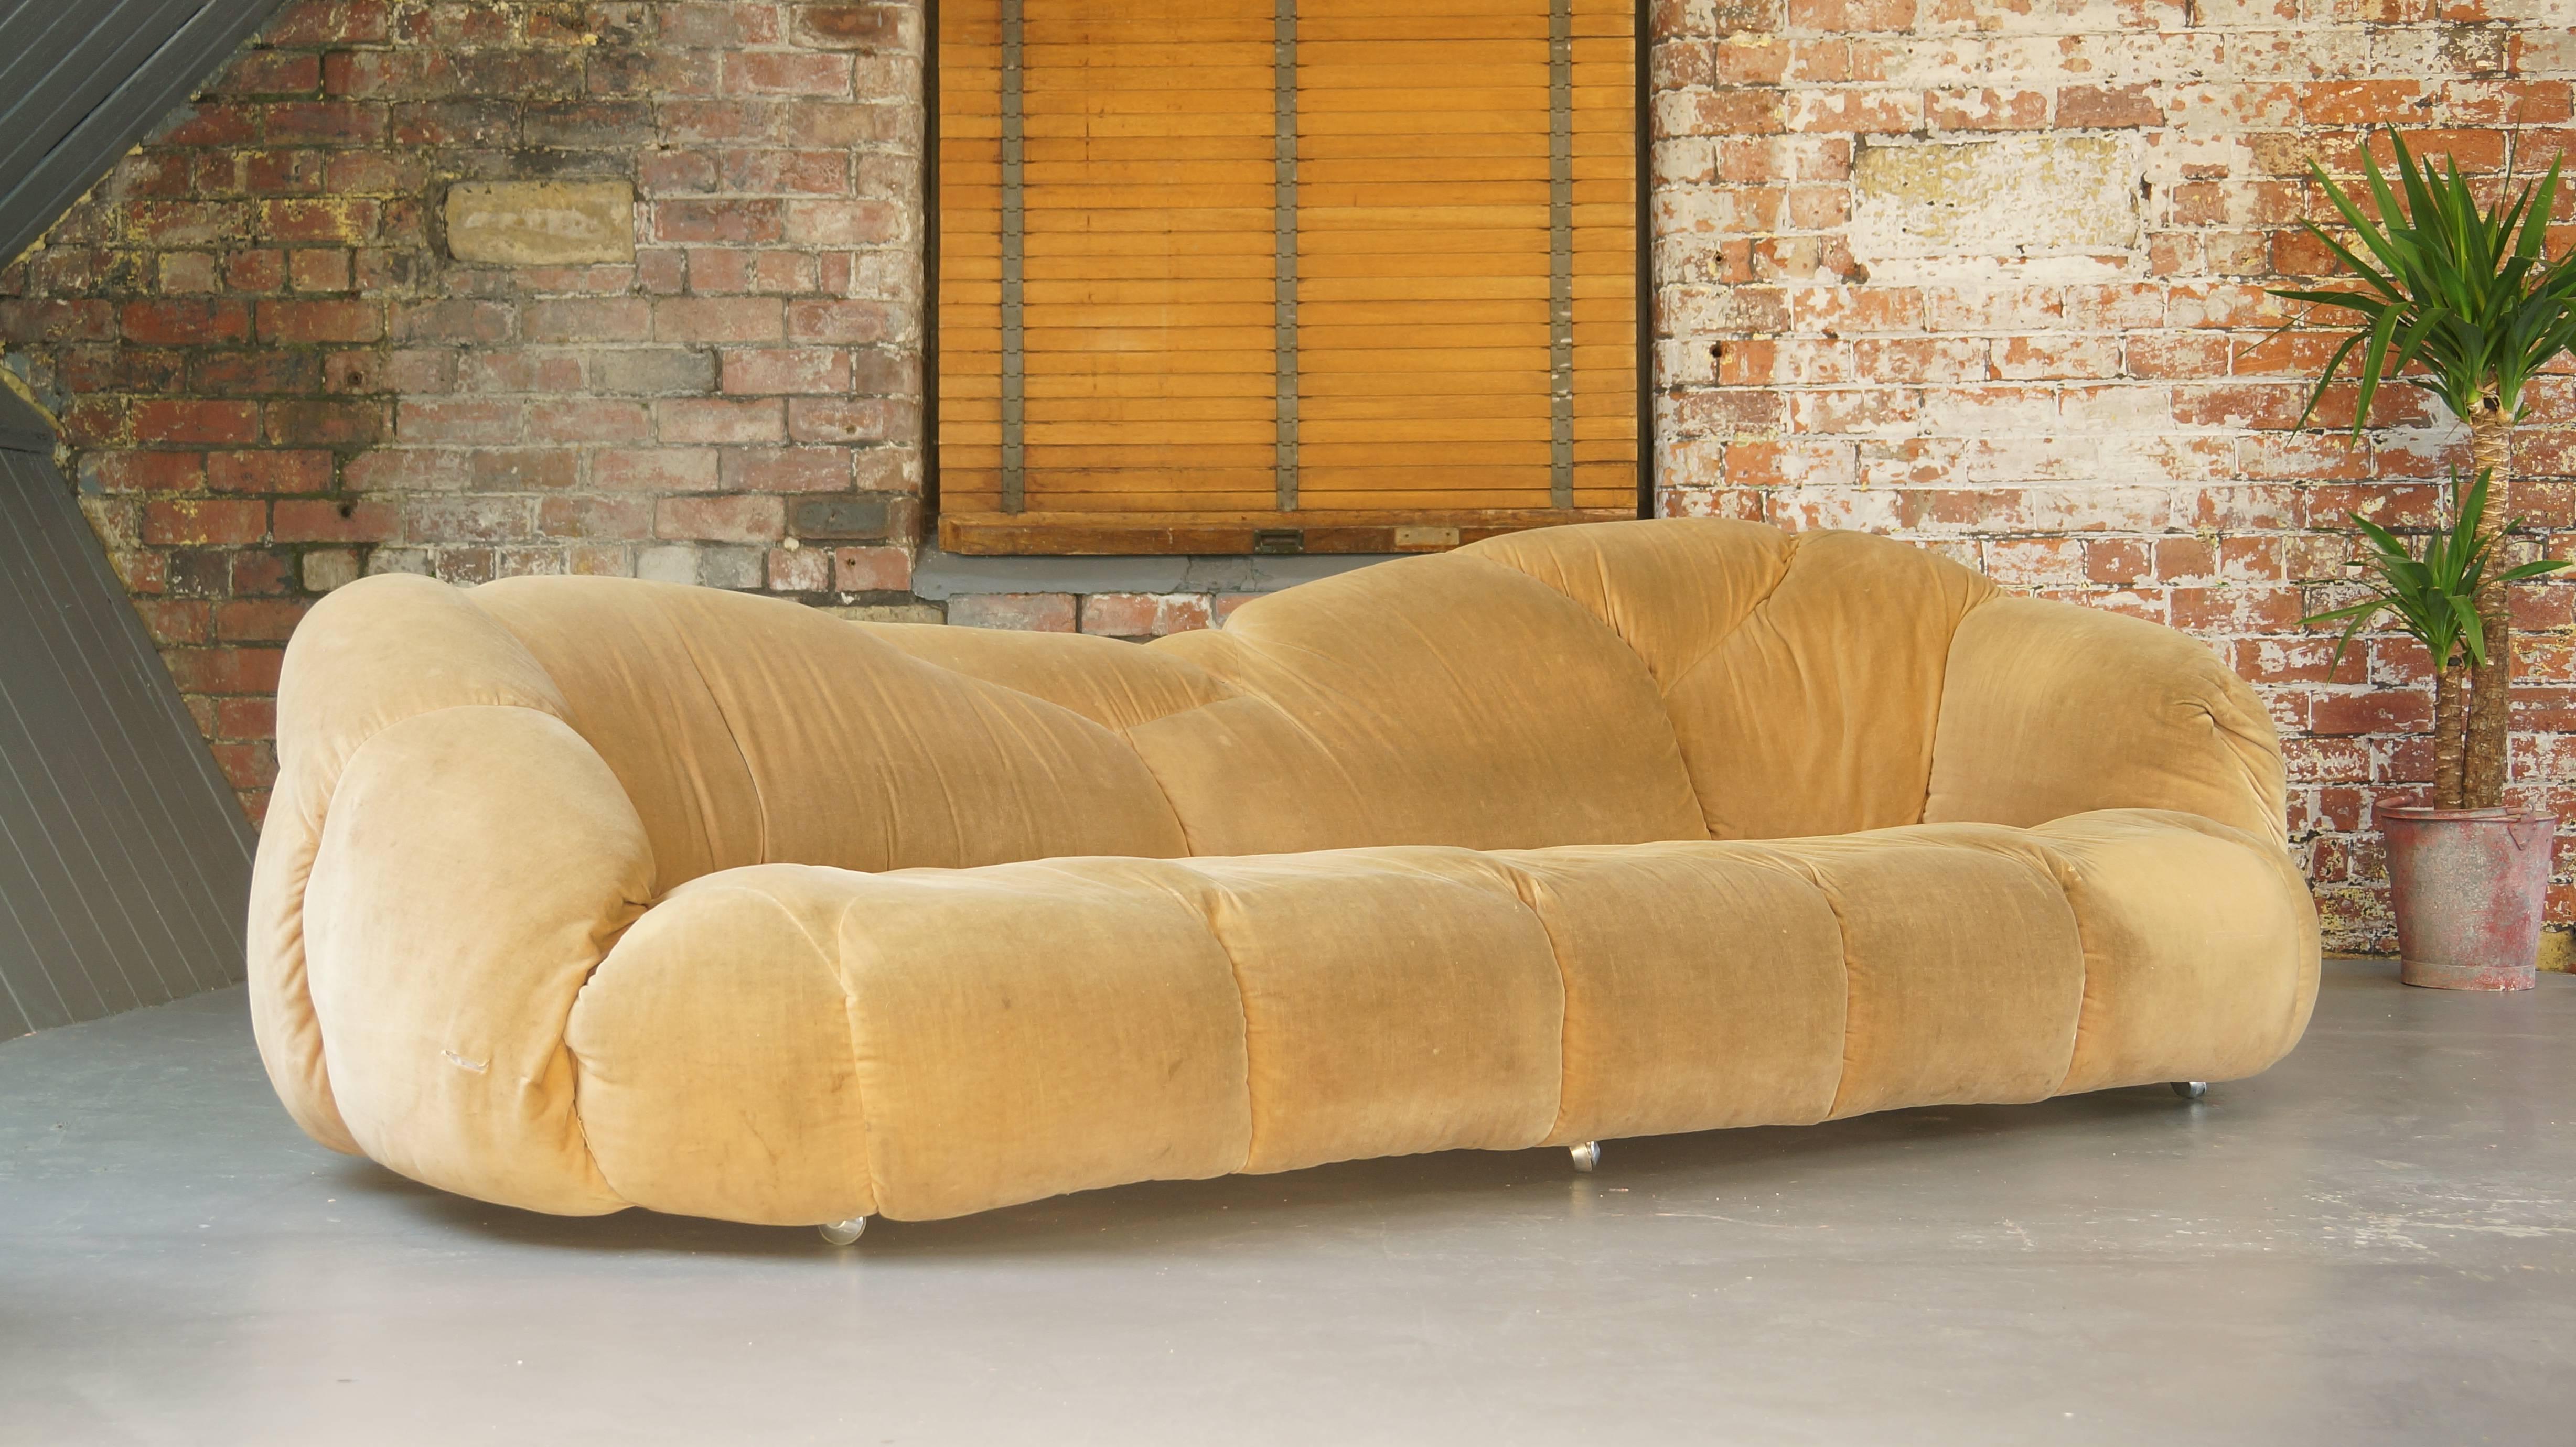 Late 20th Century Large Vintage 1970 HK Cloud Sofa by Howard Keith, Chaise Lounge or Chaise Longue